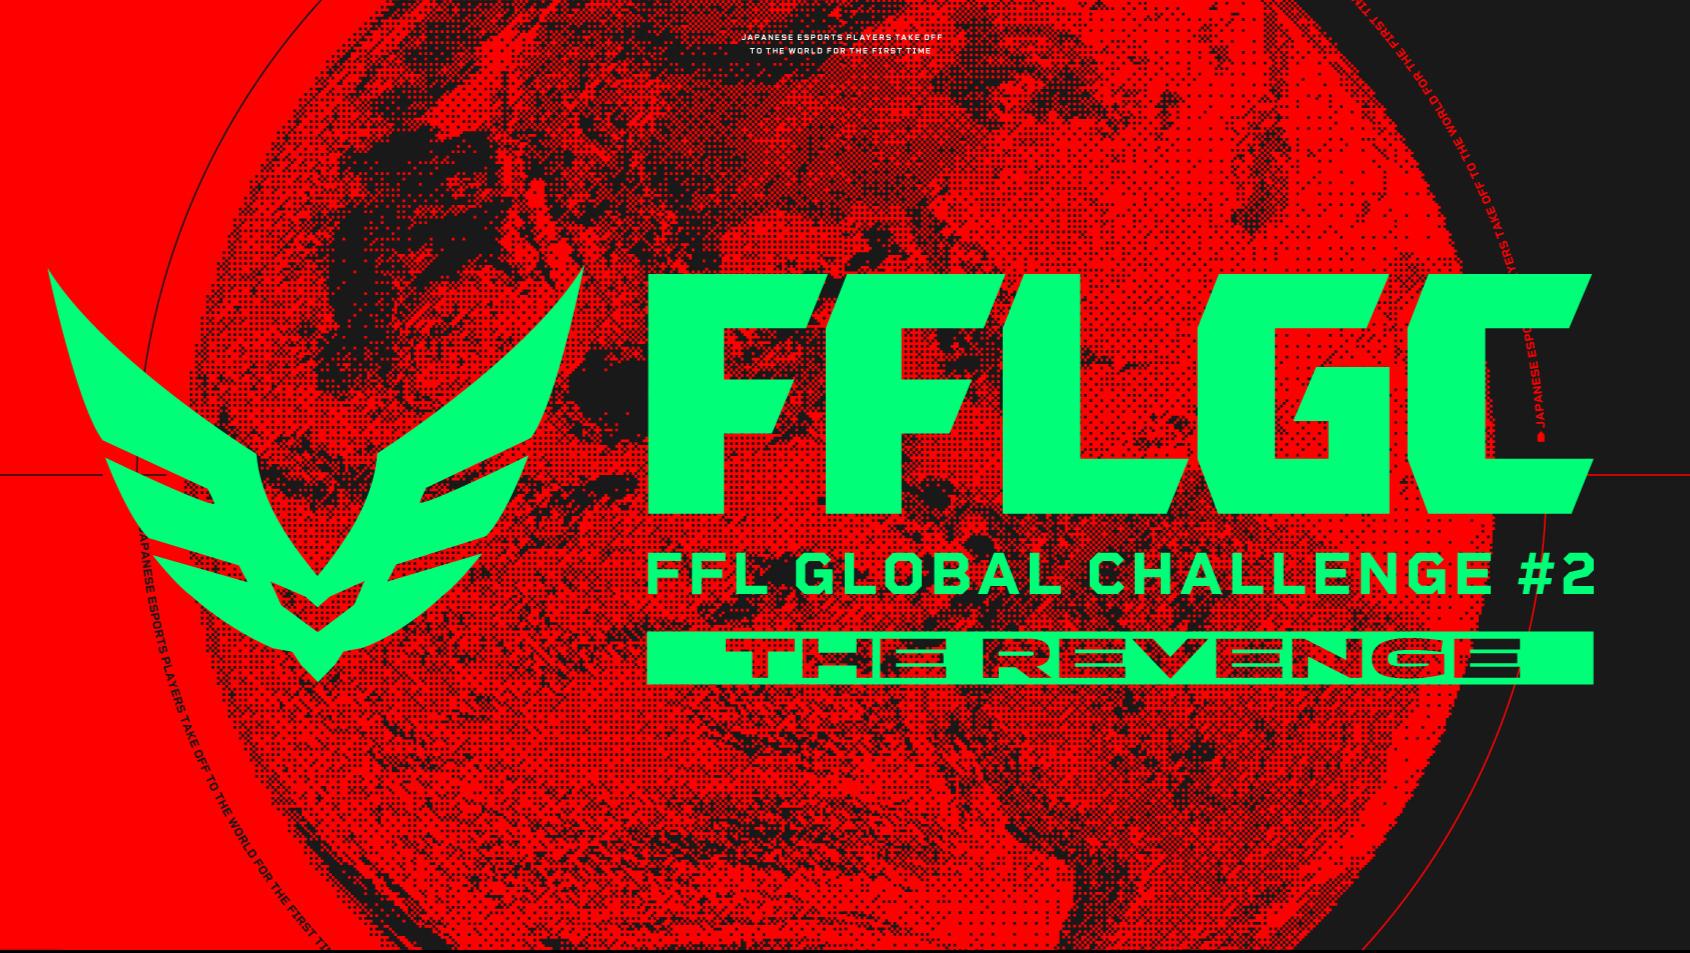 FFL GLOBAL CHALLENGE #2 feature image